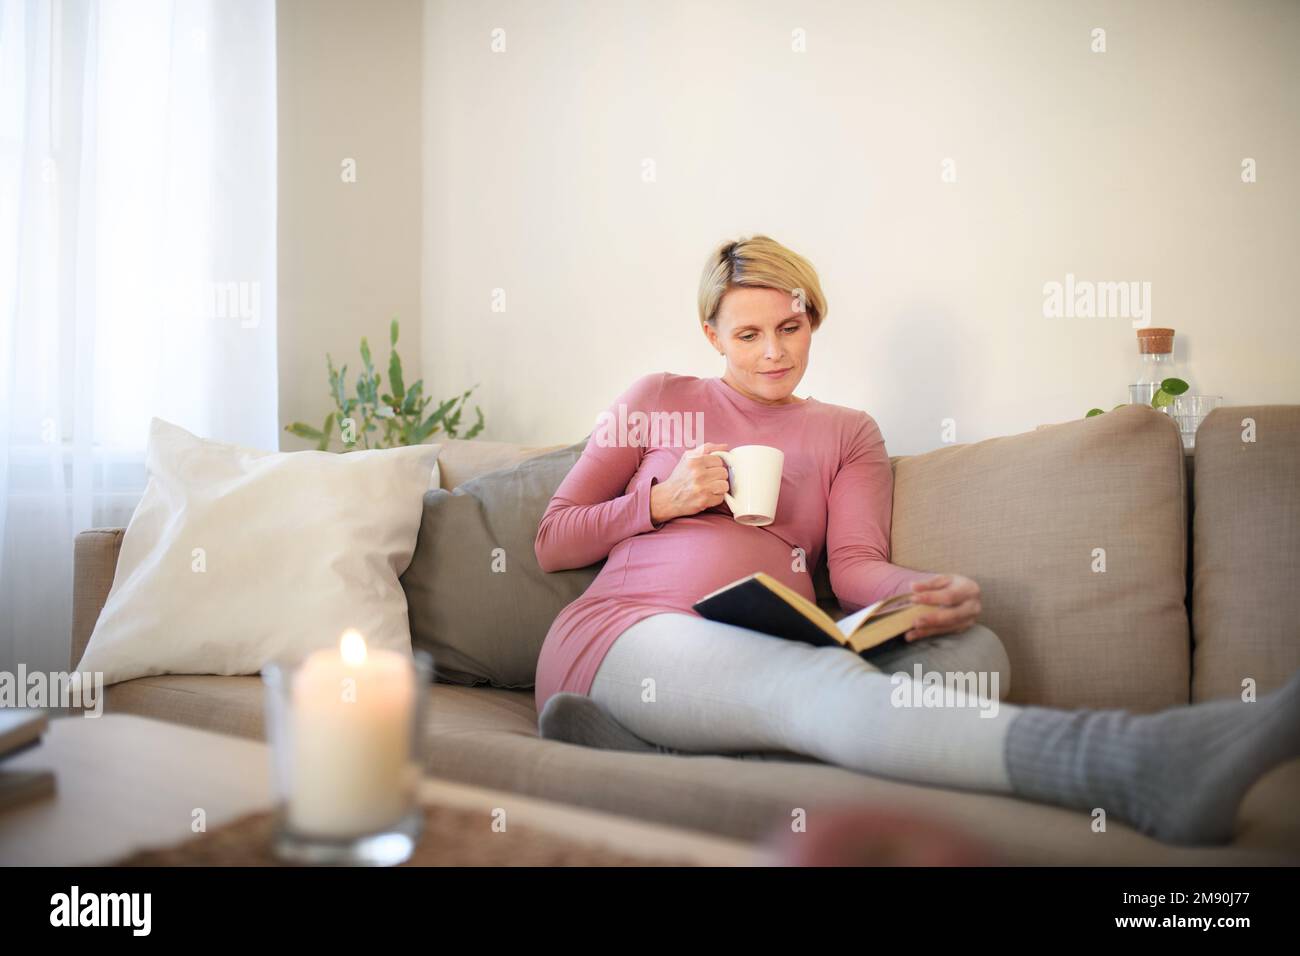 Pregnant woman sitting on sofa, reading book and enjoying cup of tea. Stock Photo